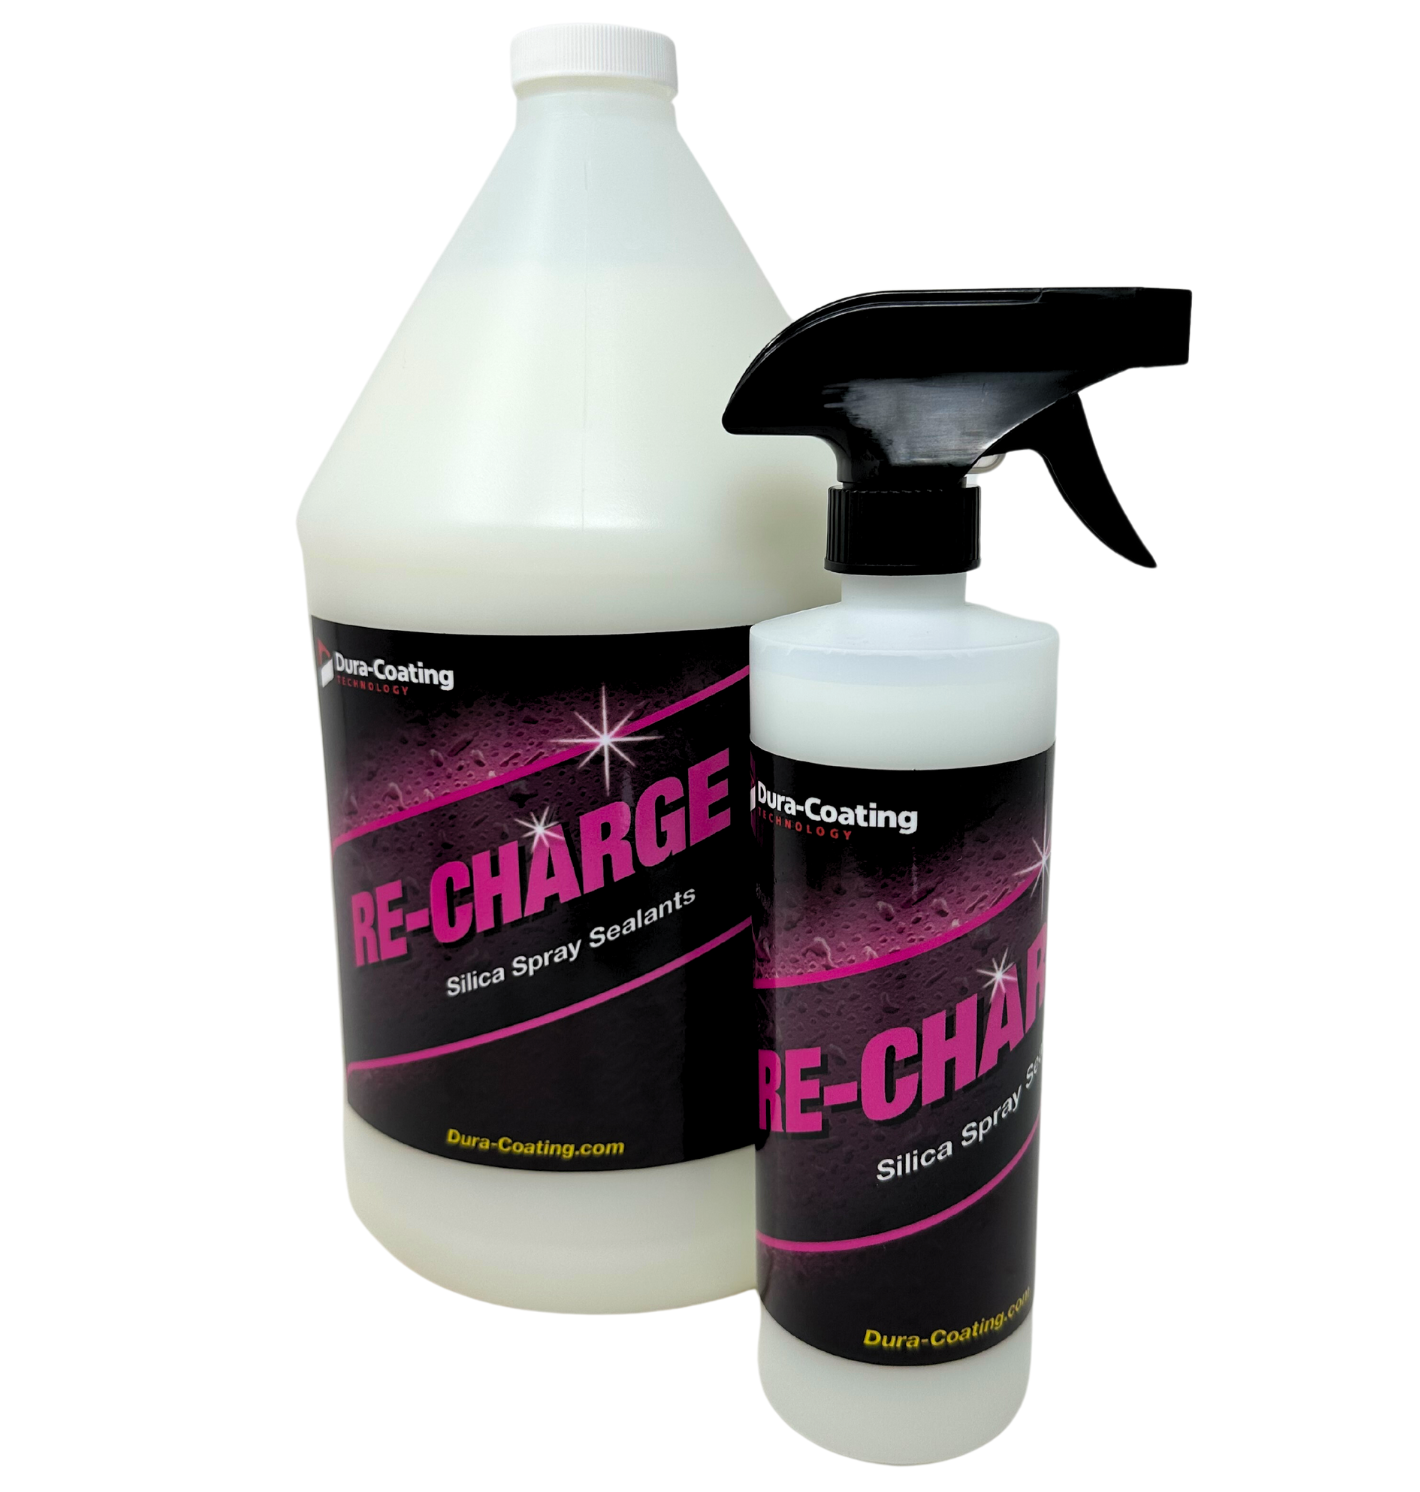 Car Wax Spray High Protection Ceramic Wax For Cars Professional